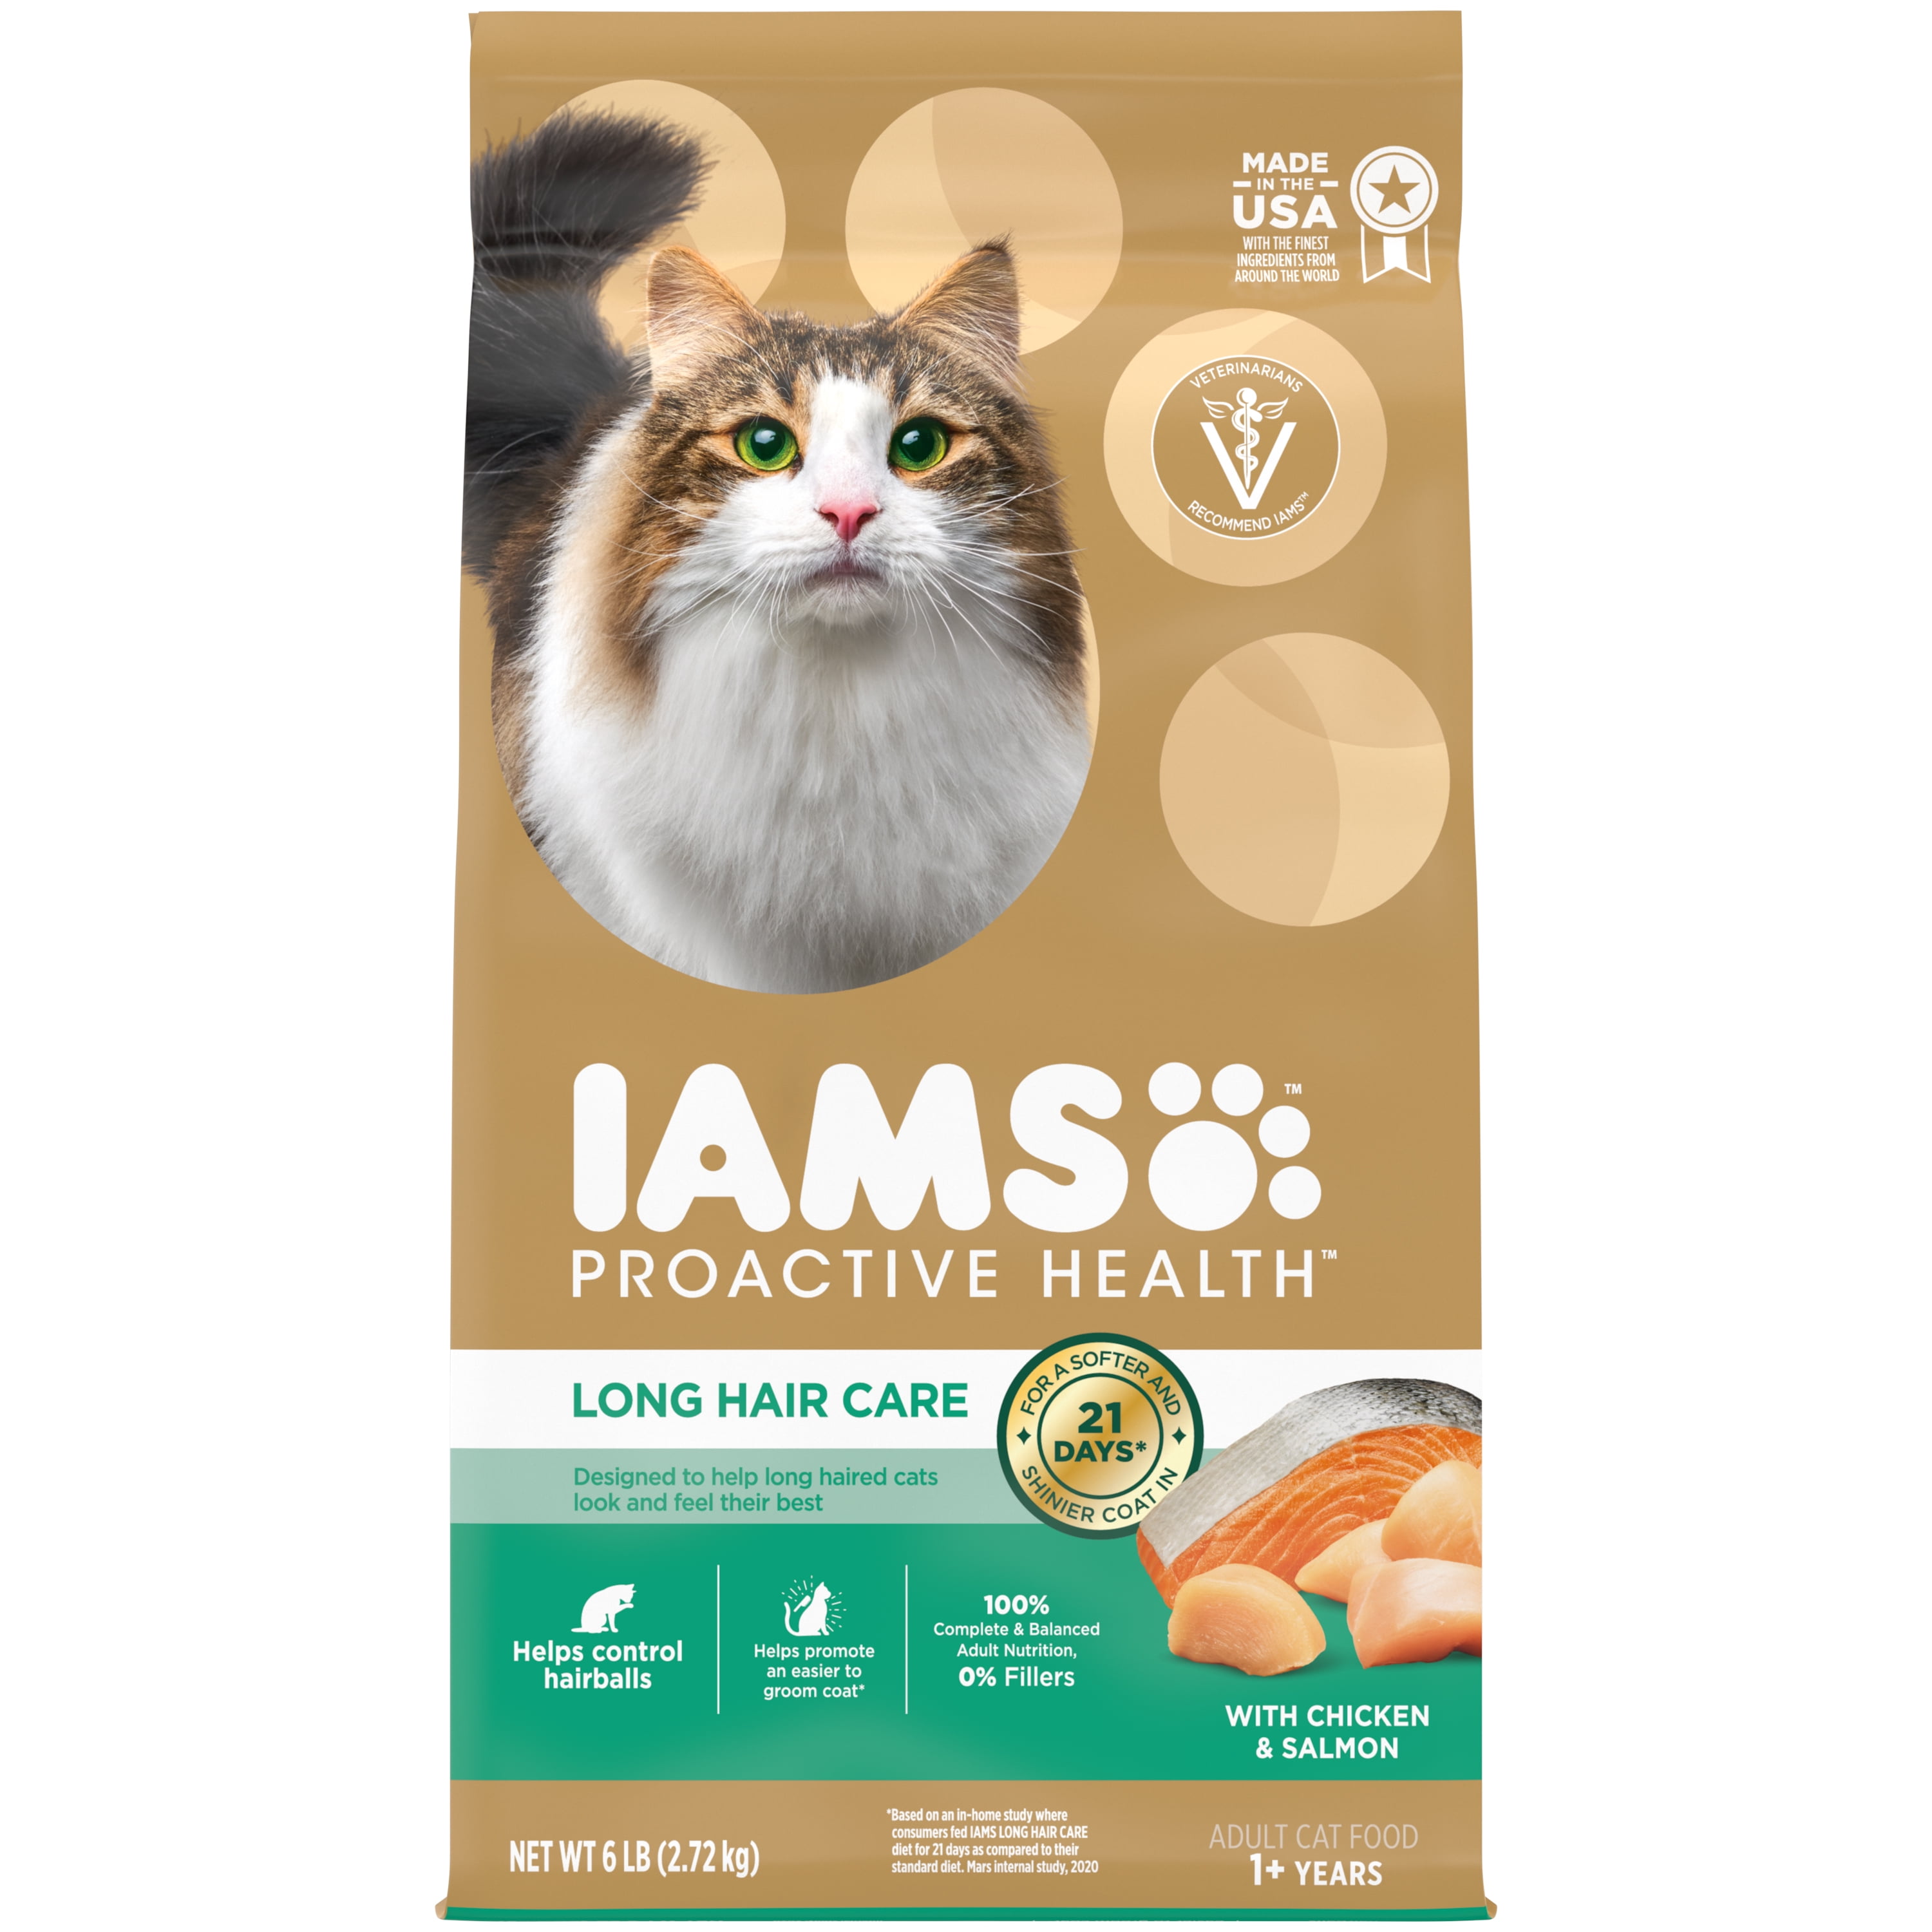 IAMS PROACTIVE HEALTH Long Hair Care Chicken Flavor Dry Food for Adult Cats, 6 lb. bag